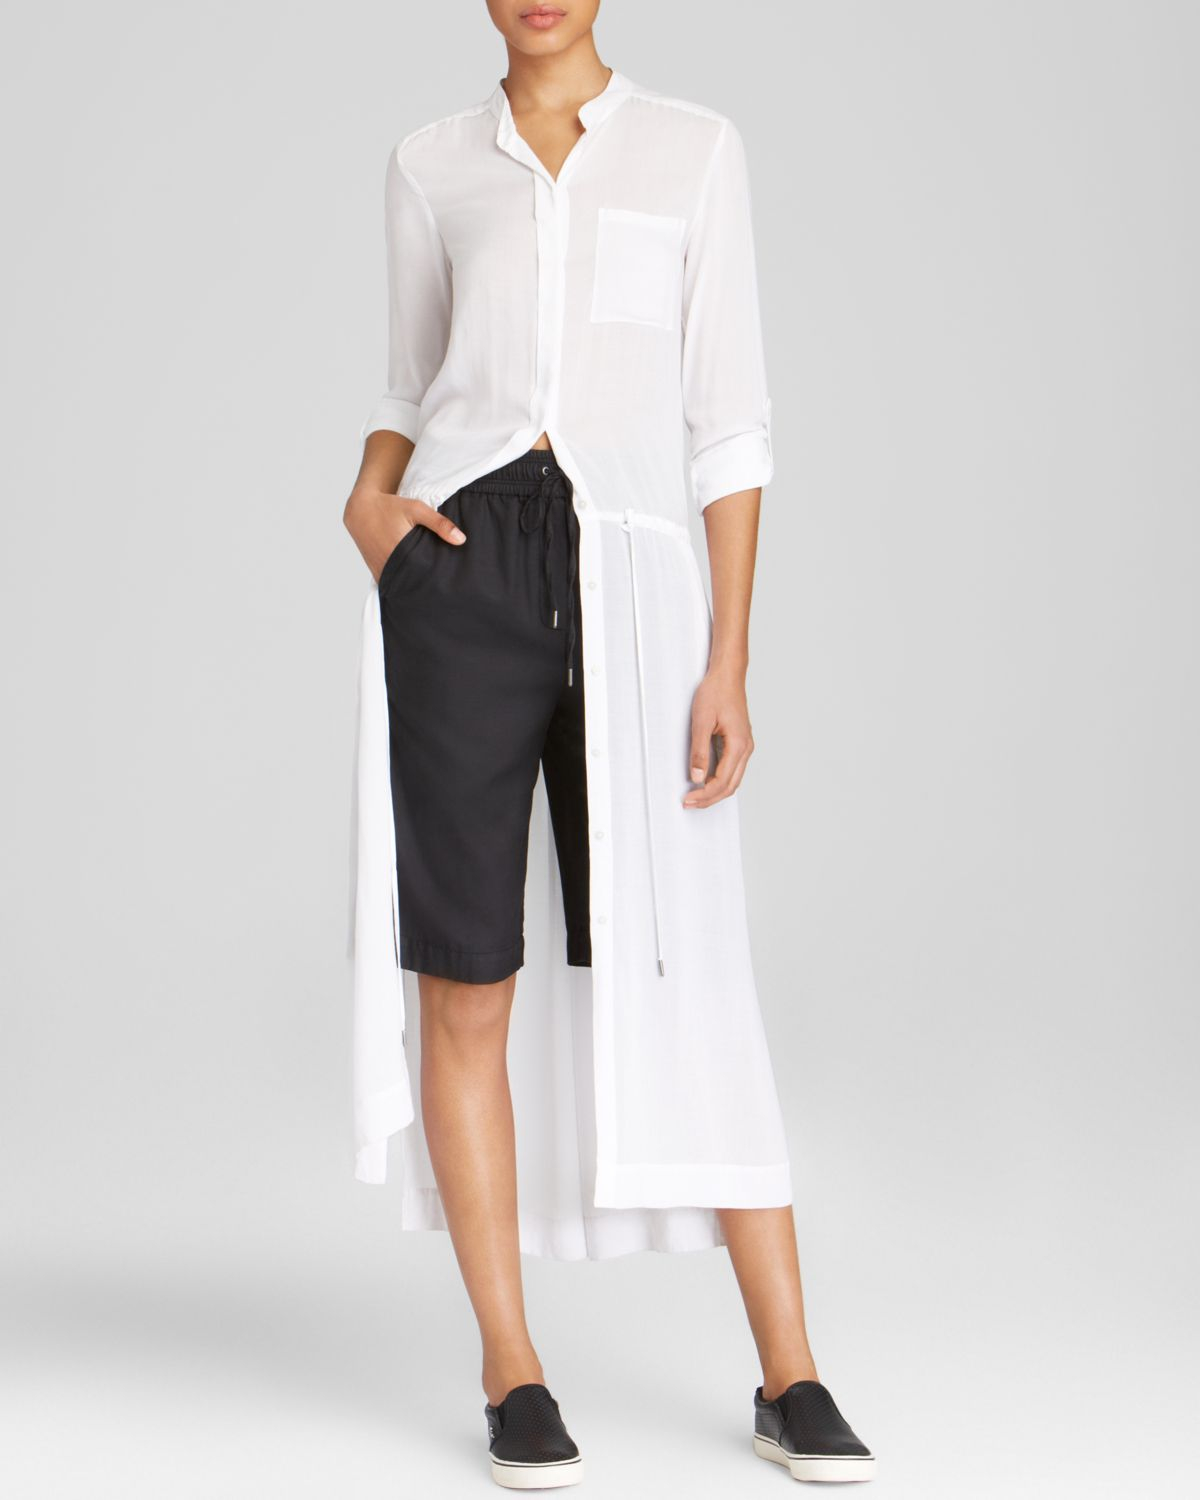 Lyst Dkny Pure Maxi  Shirt Dress  in White 